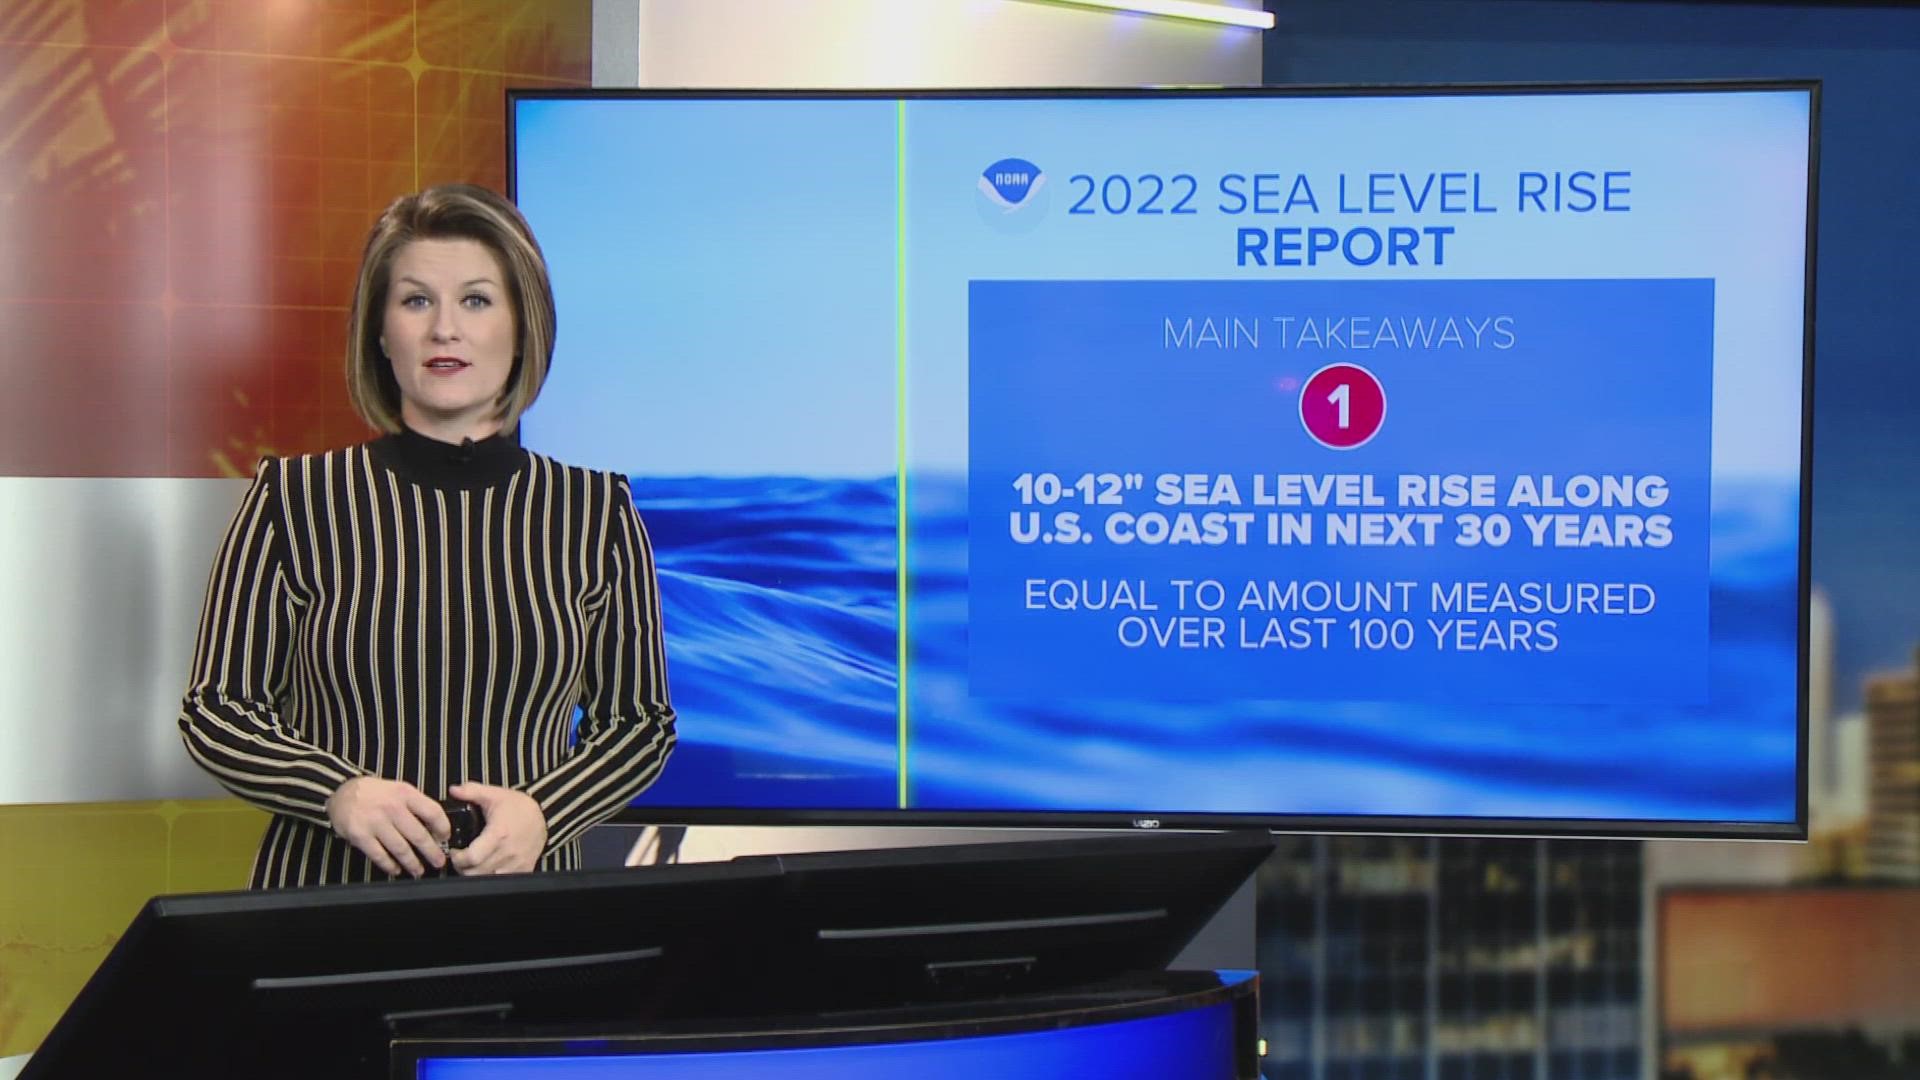 NOAA released an updated report about sea level rise in the U.S. They found the sea level could rise up to a foot along the U.S. coast in the next 30 years.